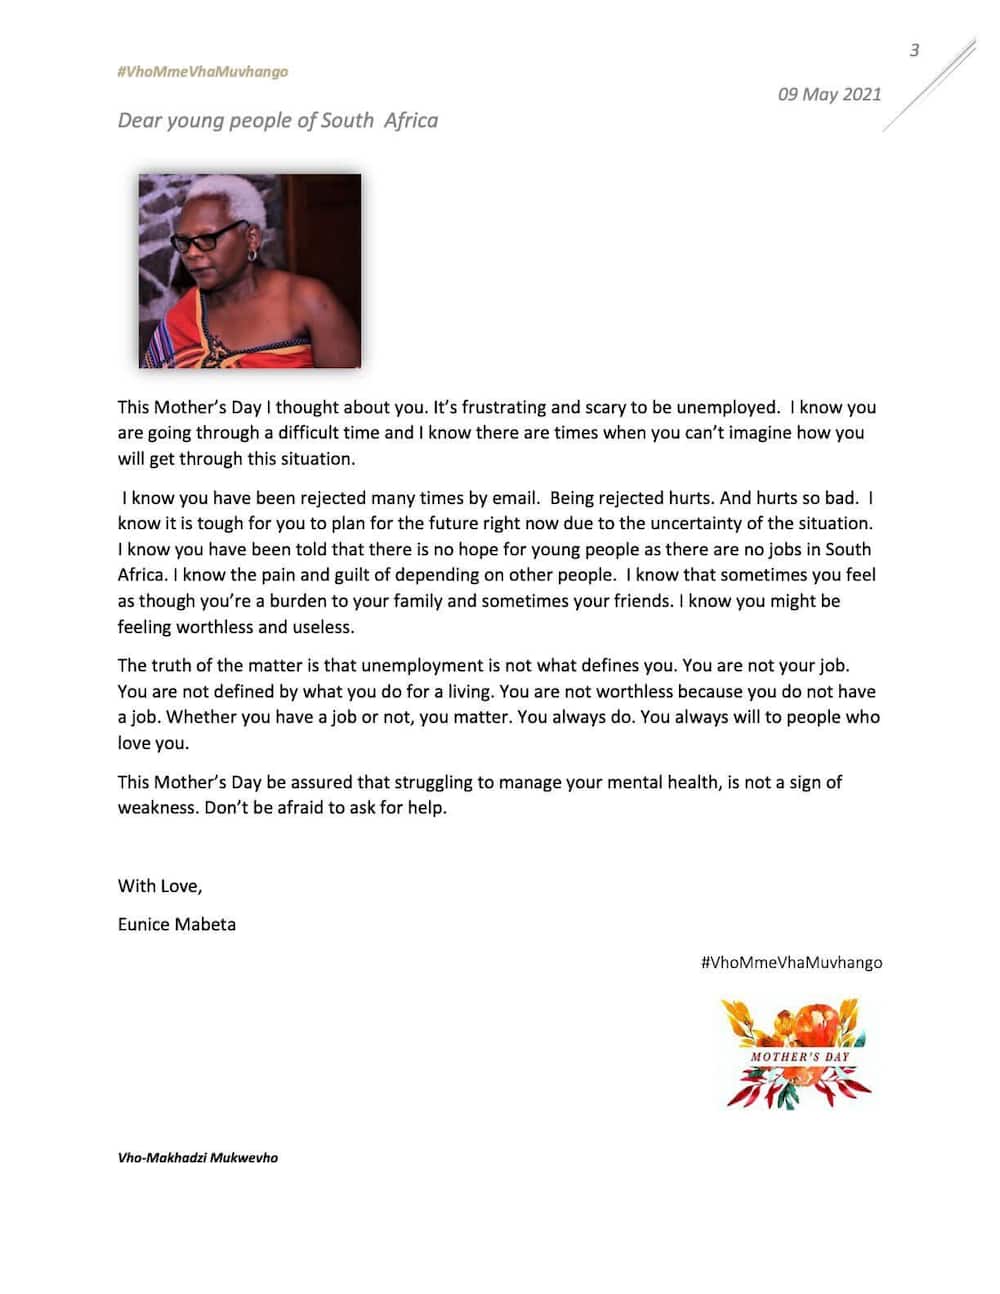 Muvhango mothers write letters to the youth in commemoration of Mother's Day